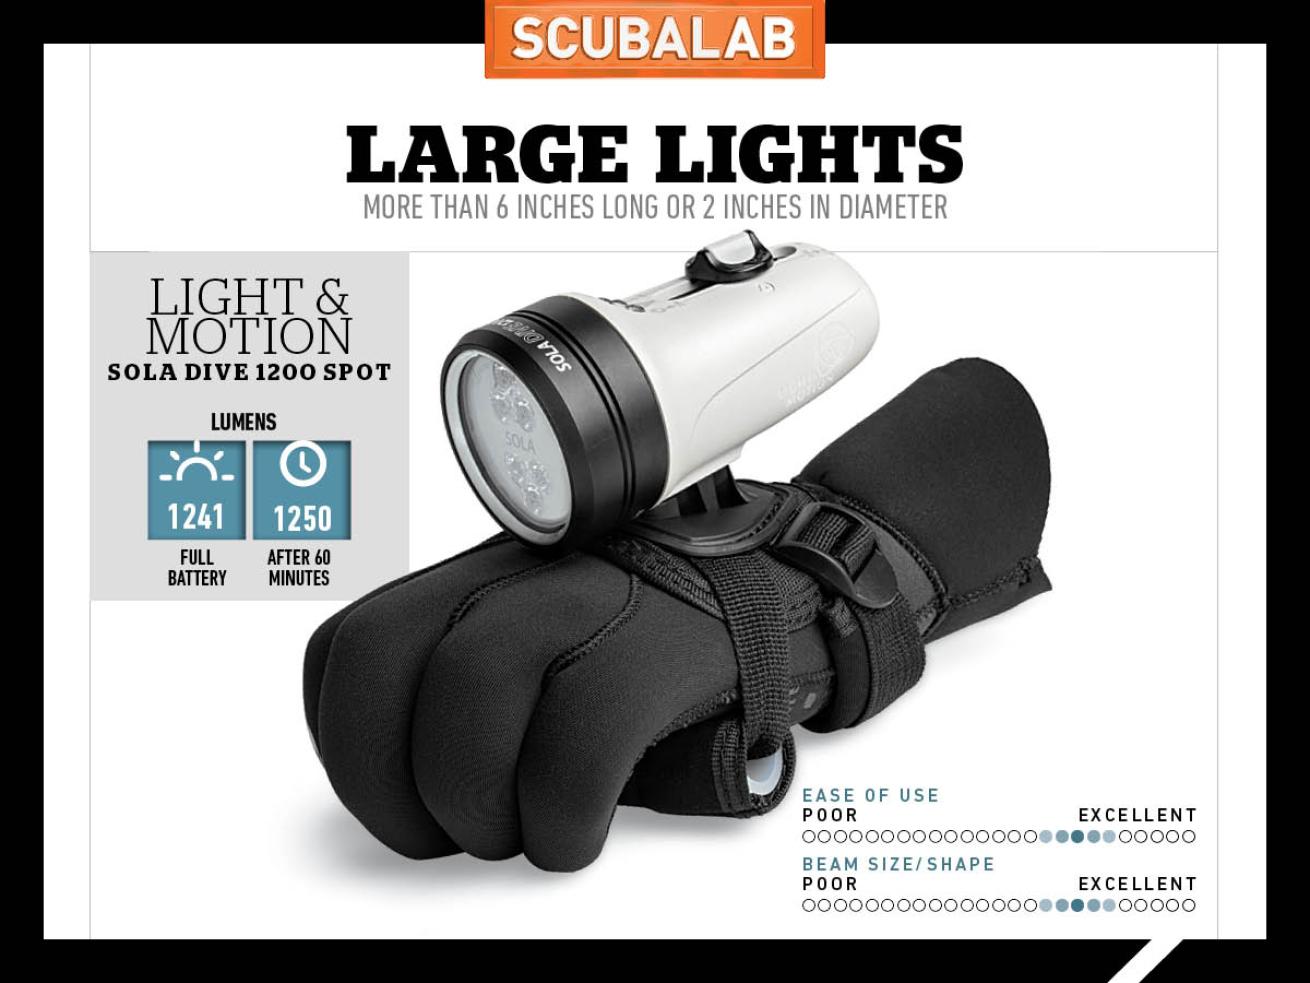 Light and Motion Sola Dive 1200 Spot Light Reviewed by ScubaLab